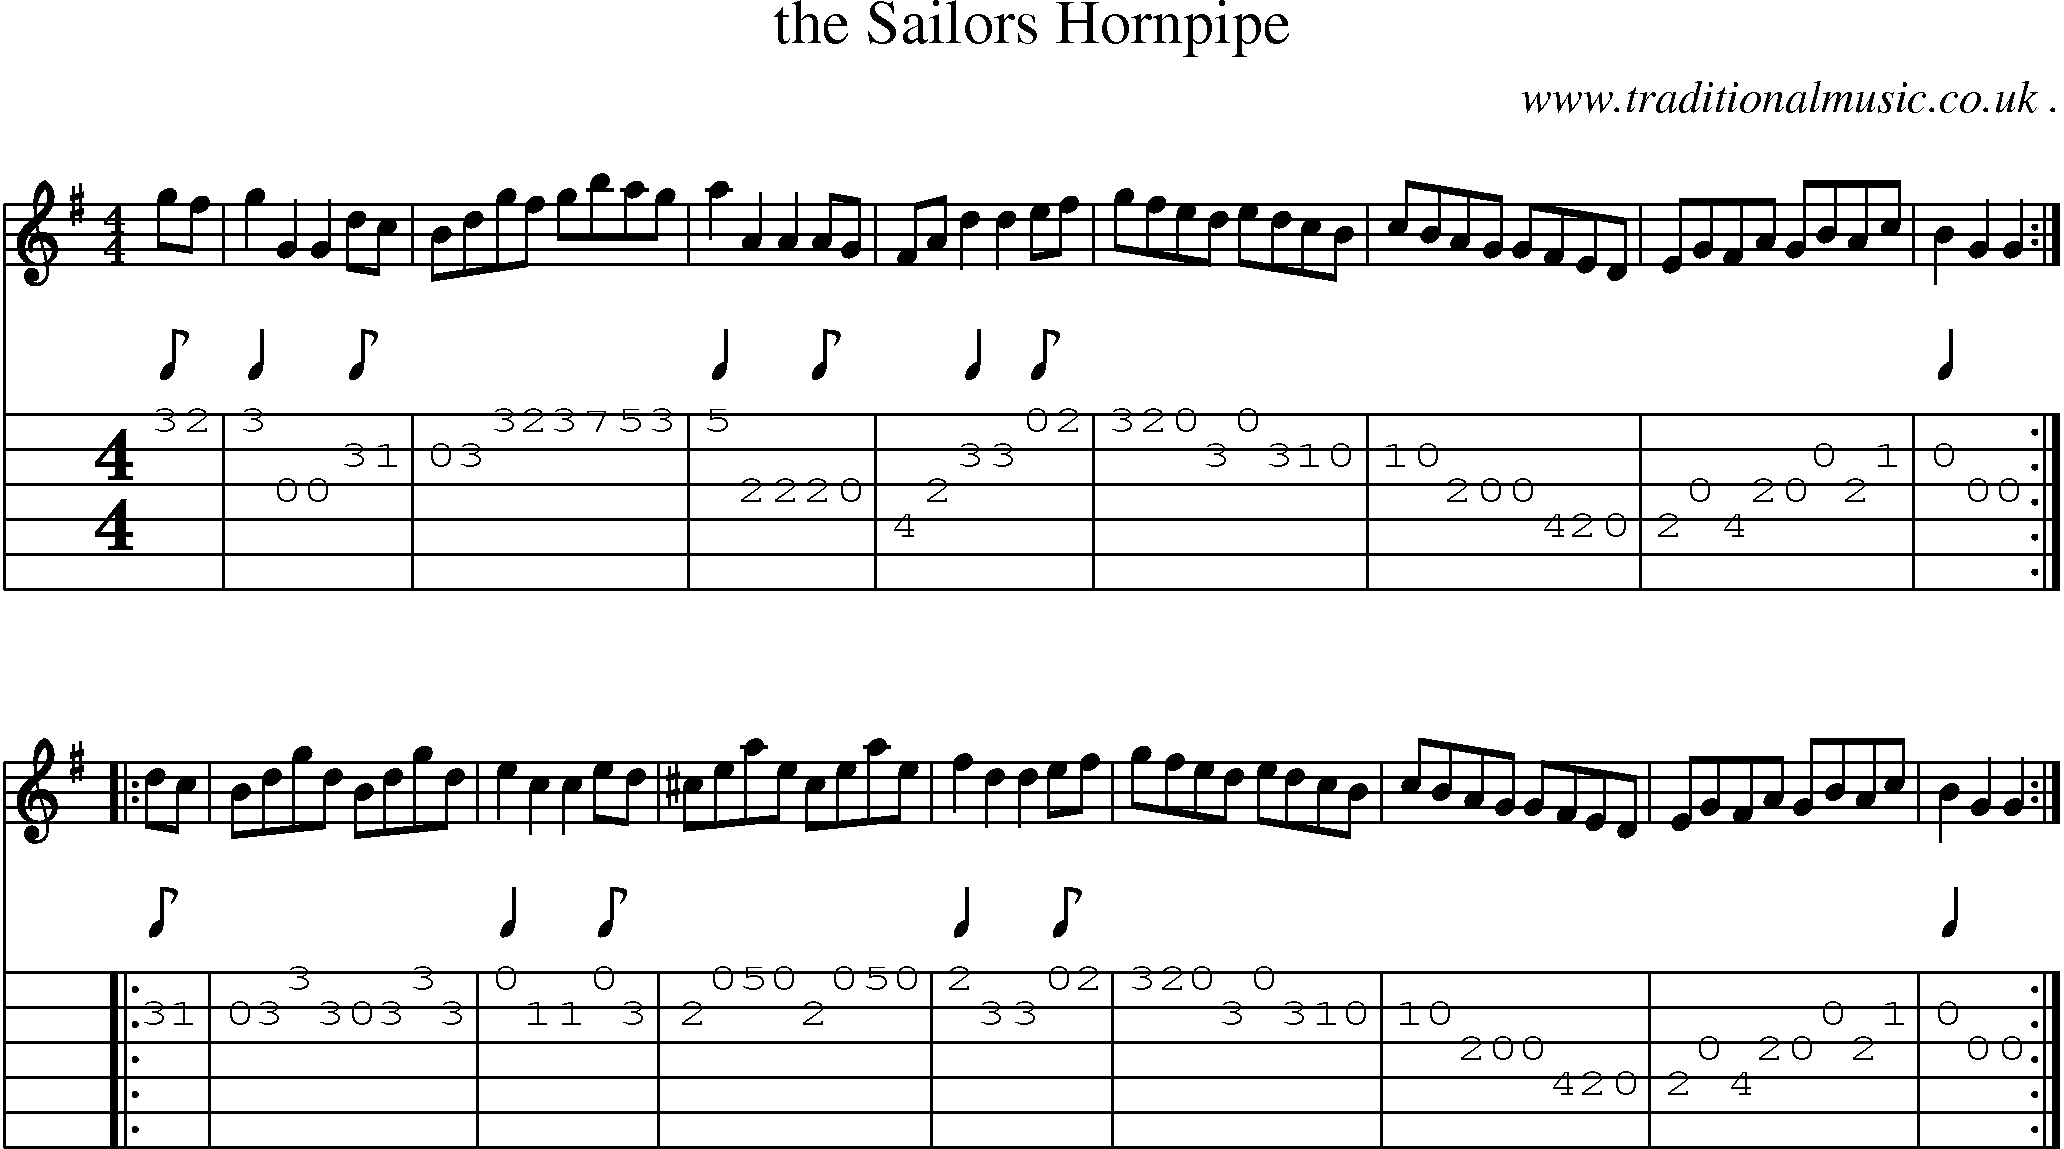 Sheet-Music and Guitar Tabs for The Sailors Hornpipe